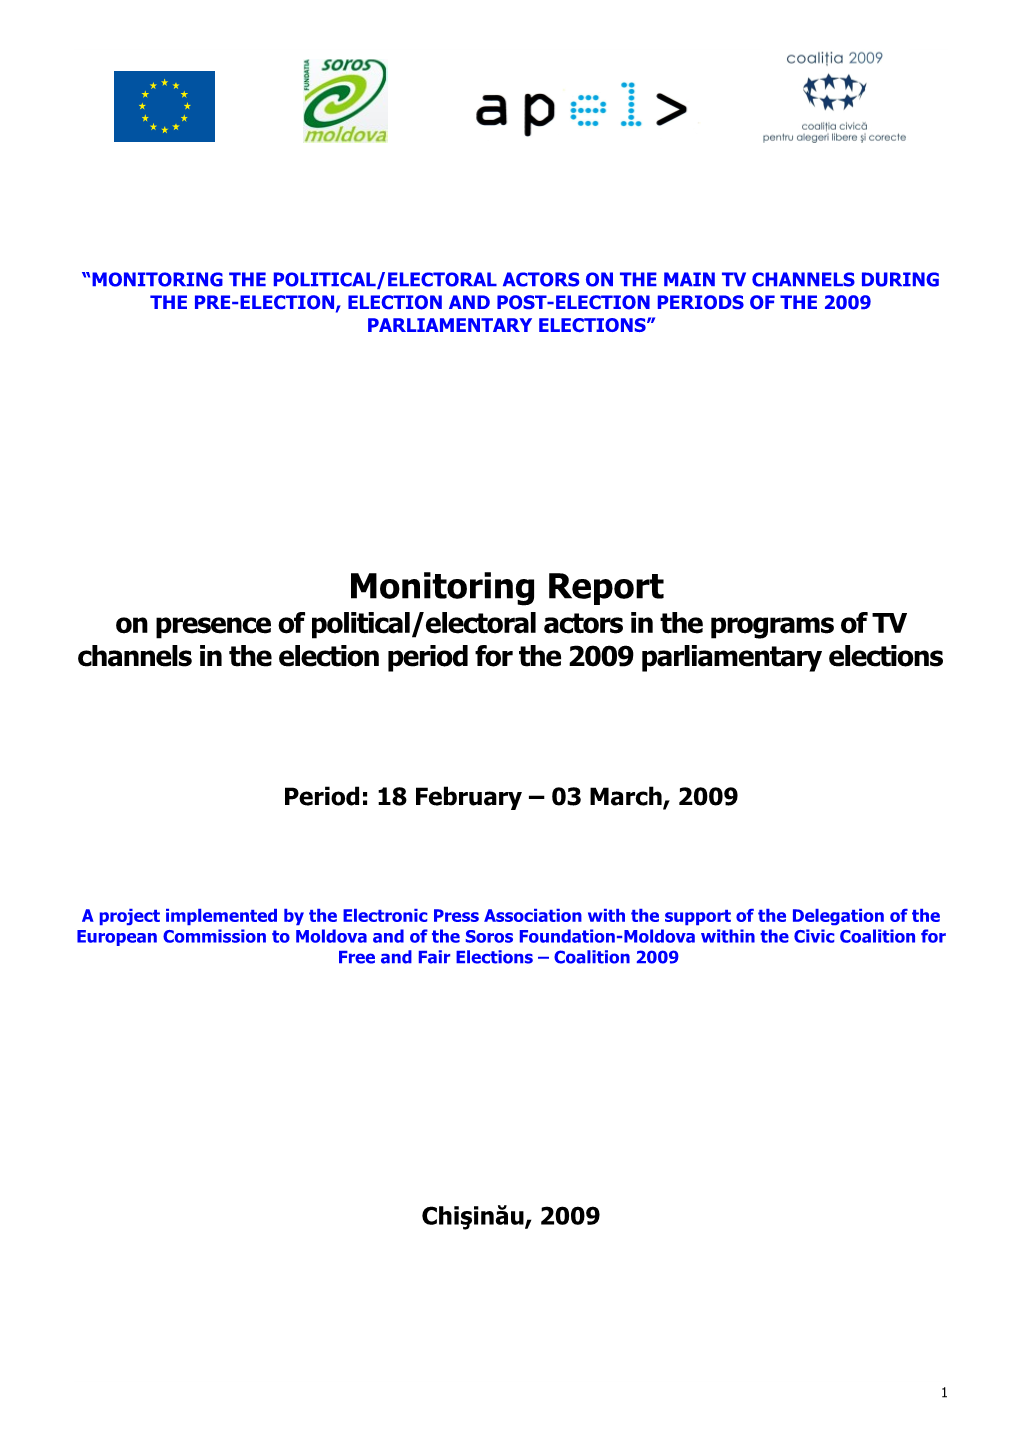 Monitoring Report on Presence of Political/Electoral Actors in the Programs of TV Channels in the Election Period for the 2009 Parliamentary Elections